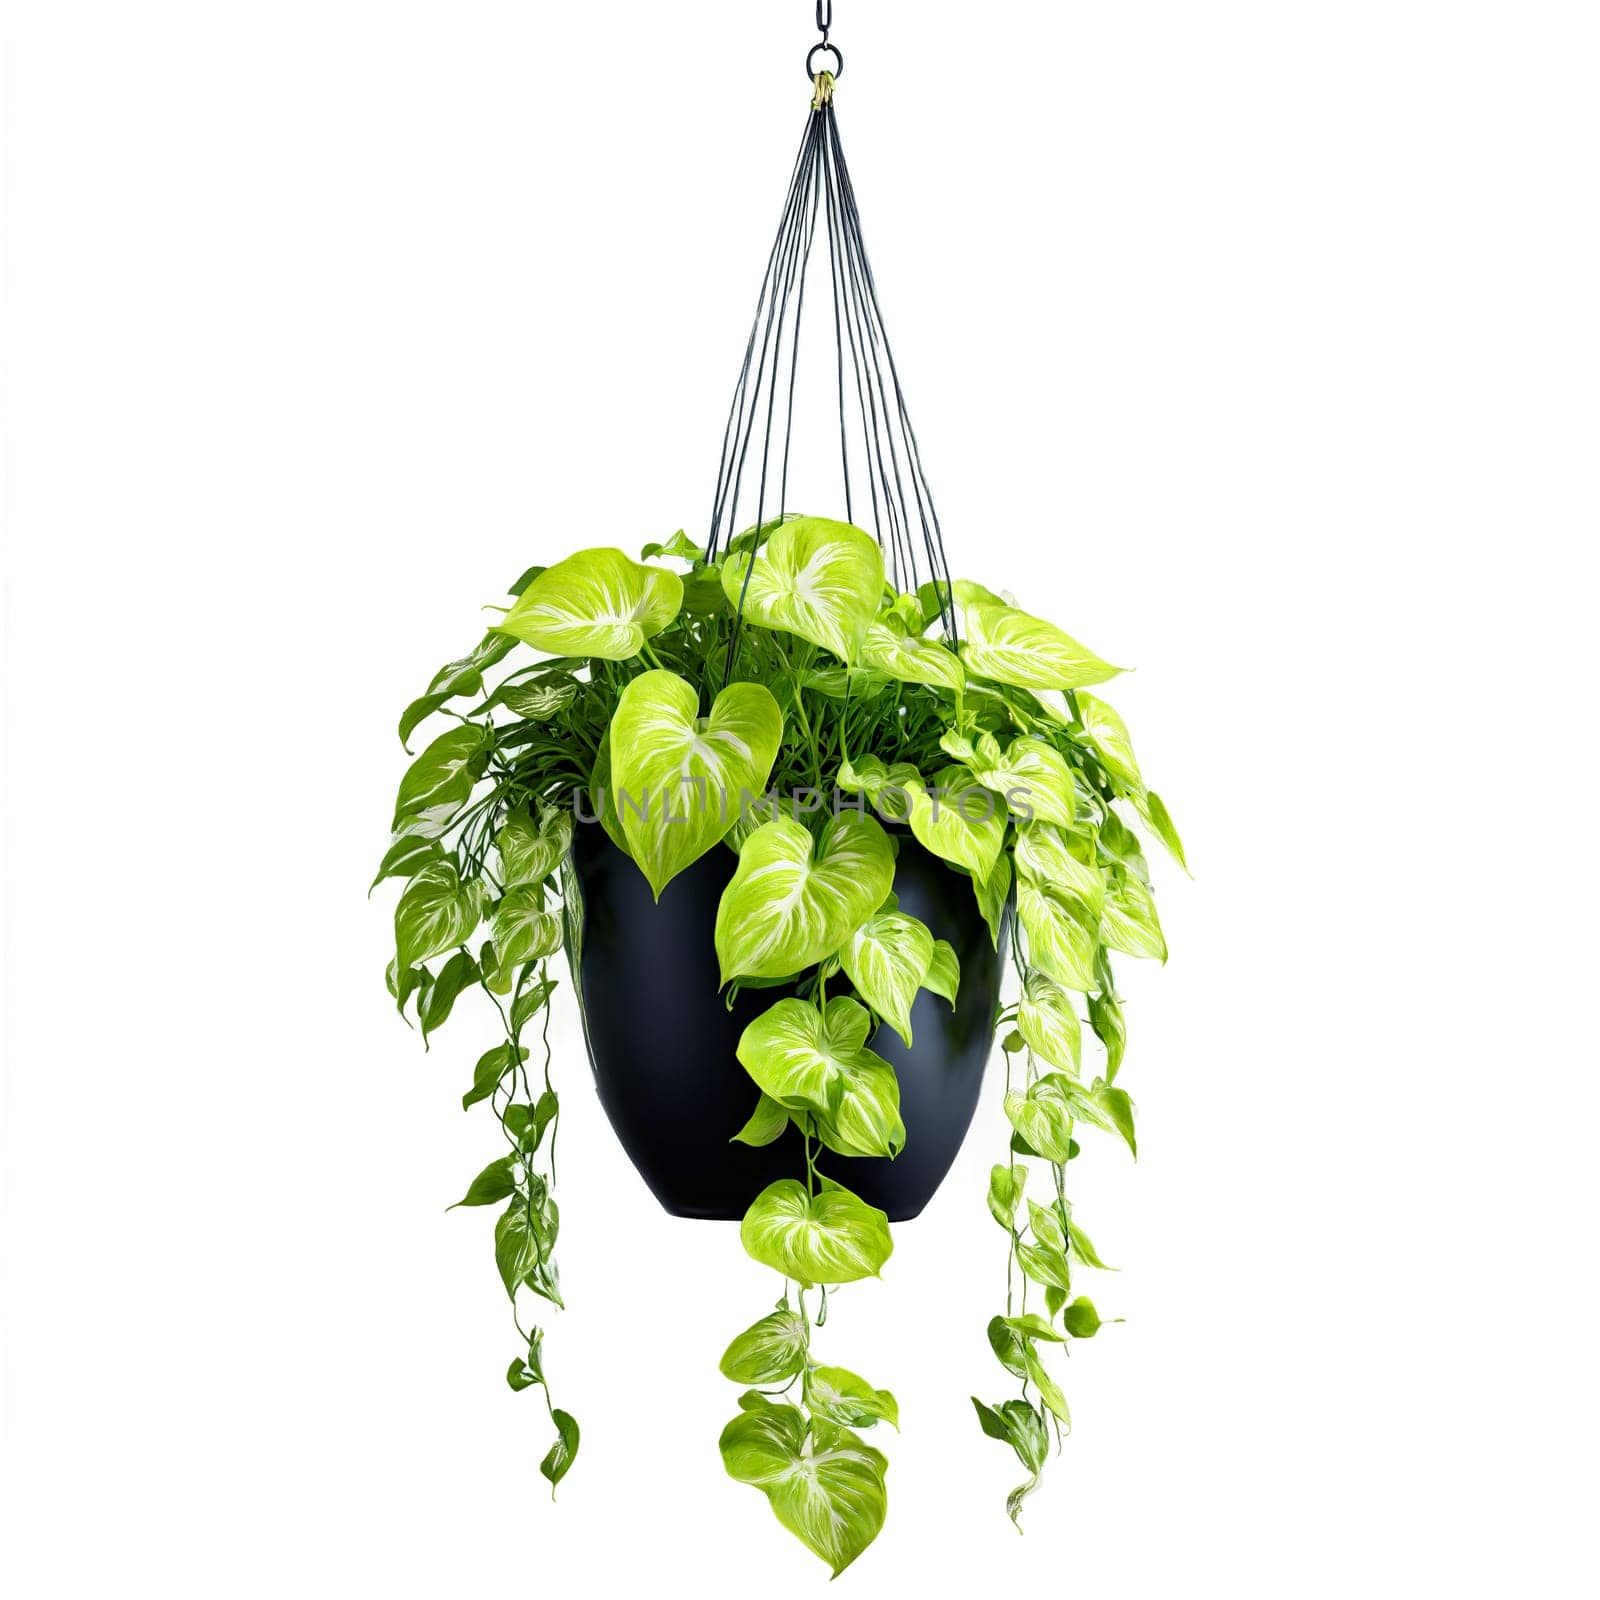 Pothos Neon trailing plant with bright chartreuse leaves in a modern black ceramic hanging planter. Plants isolated on transparent background.